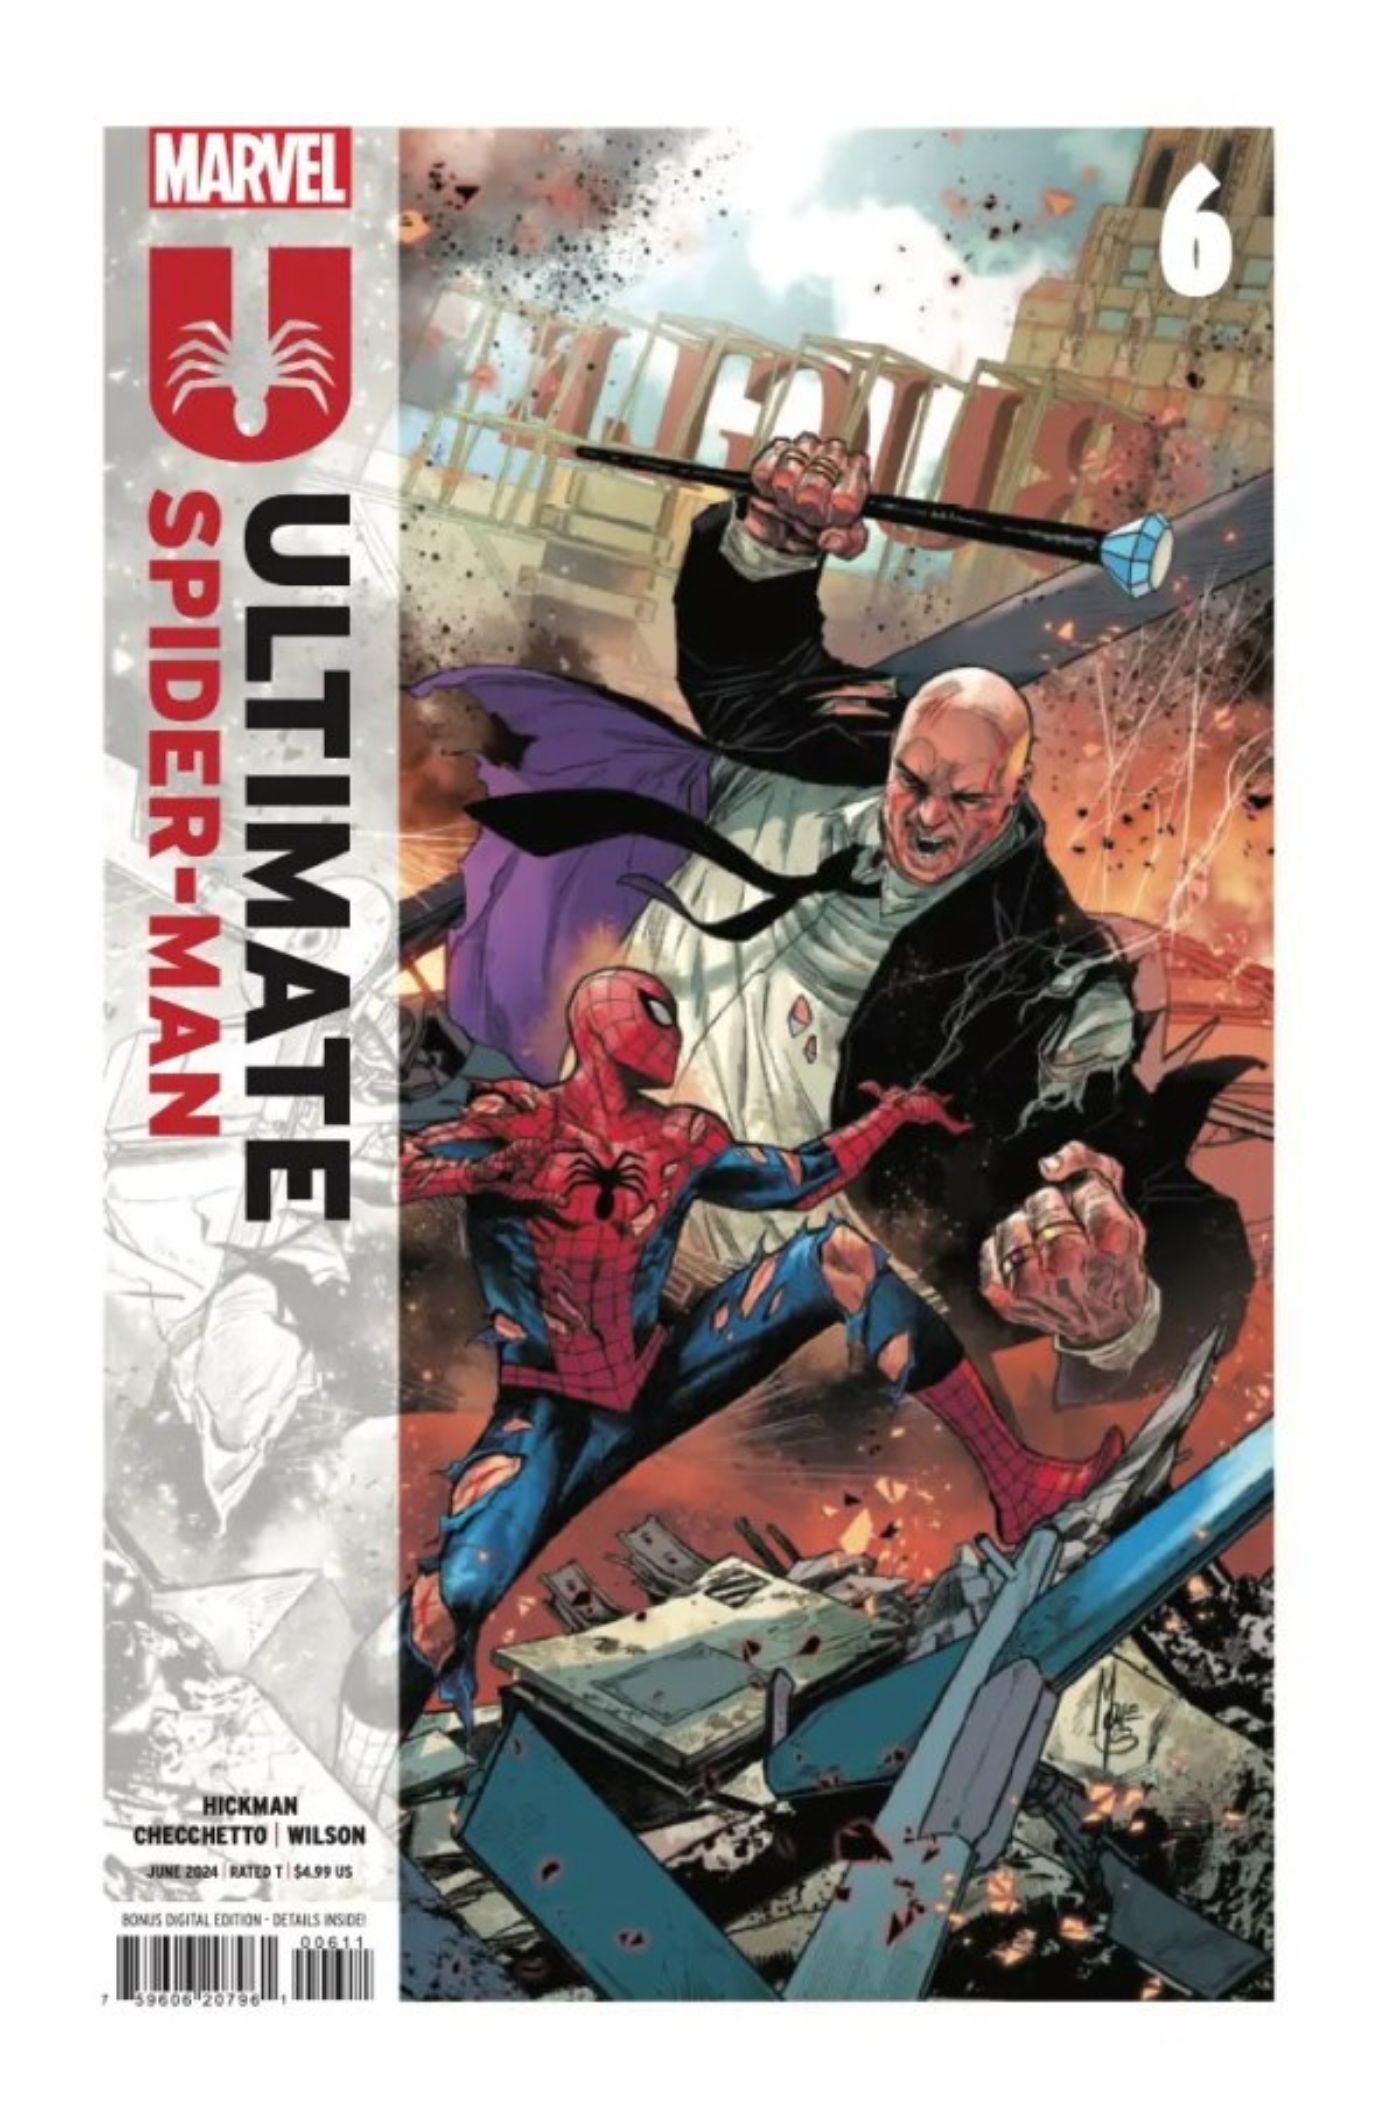 Ultimate Spider-Man #6 cover art featuring Spider-Man fighting the Kingpin.